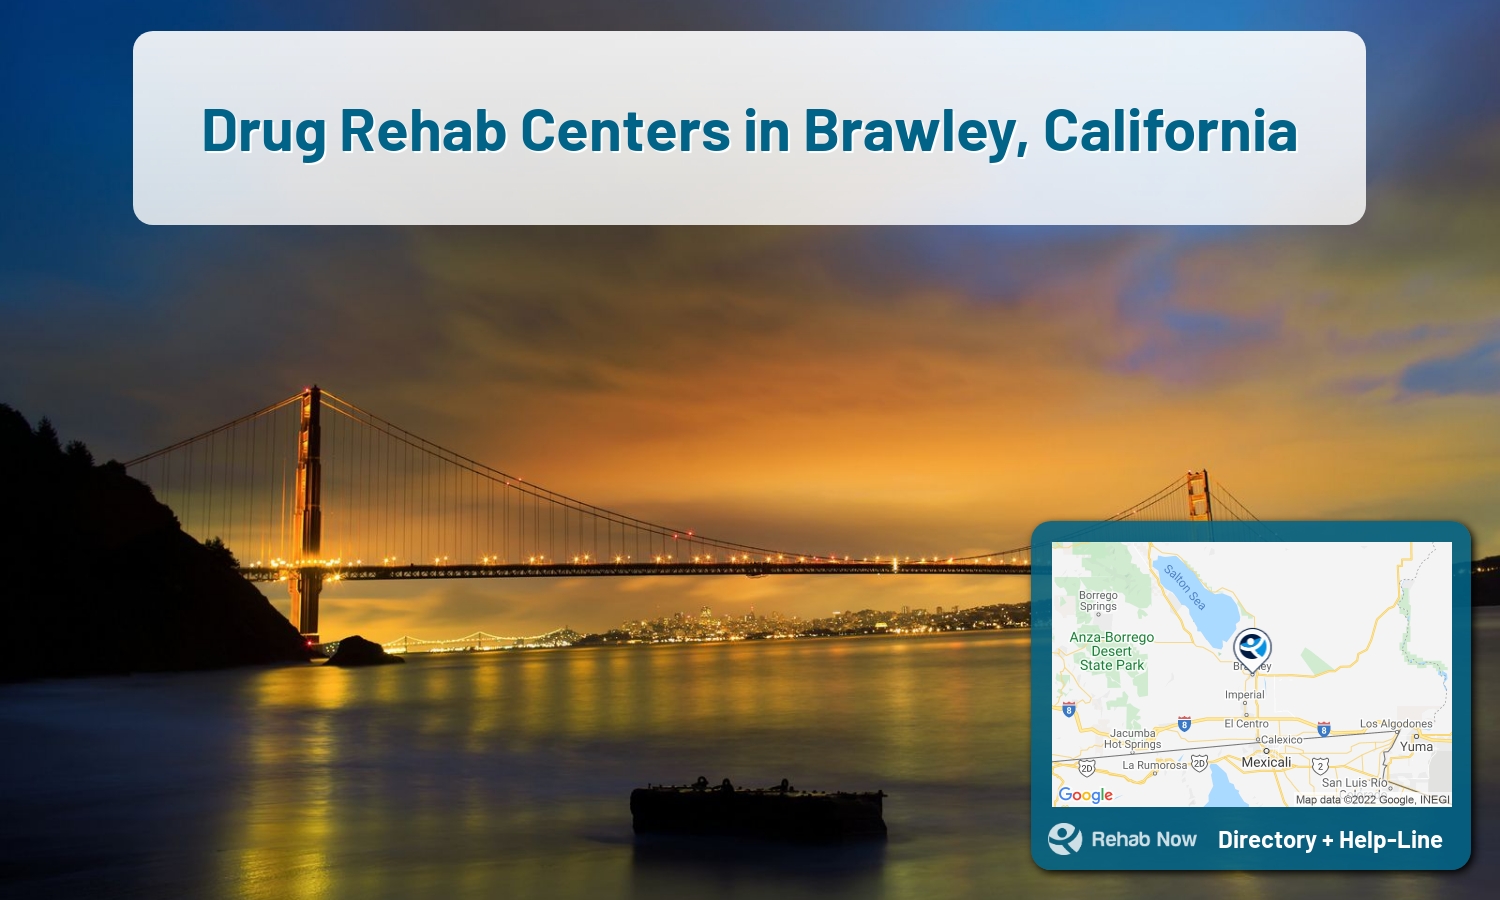 Let our expert counselors help find the best addiction treatment in Brawley, California now with a free call to our hotline.